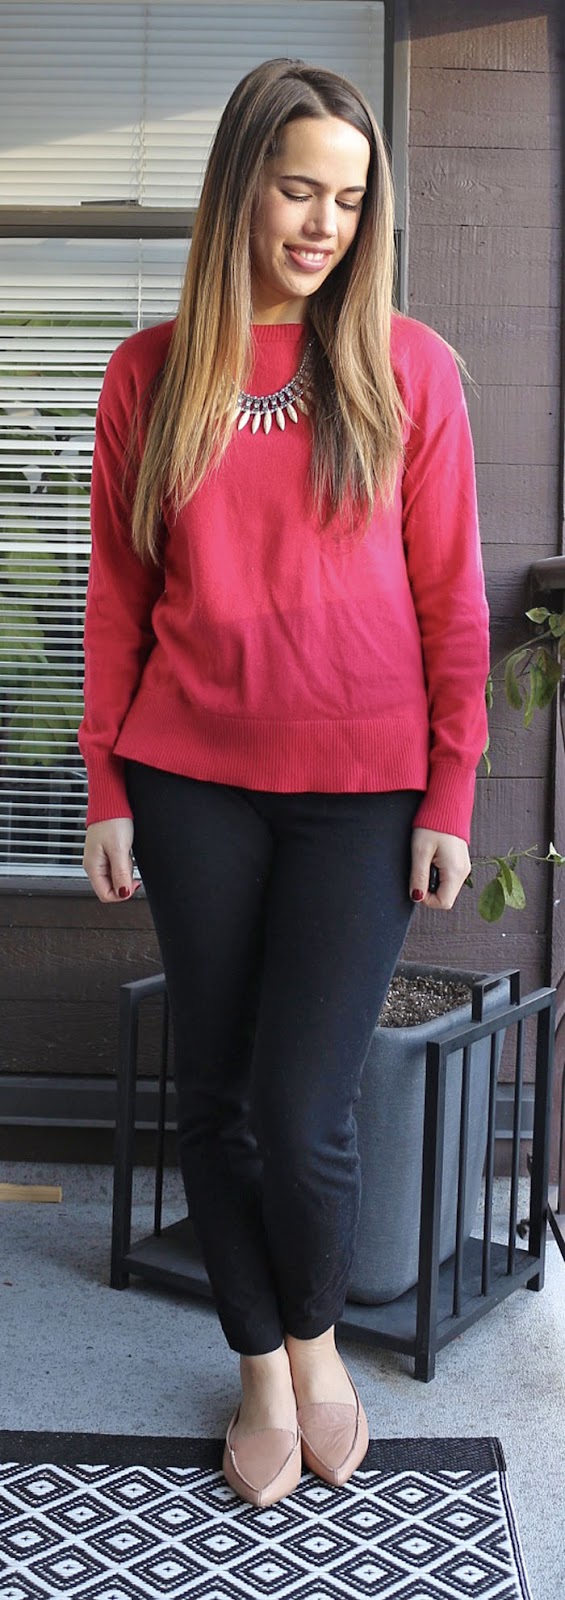 Jules in Flats - Gap Red Sweater, Old Navy Pixie Pants, Aldo Bazovica Flats